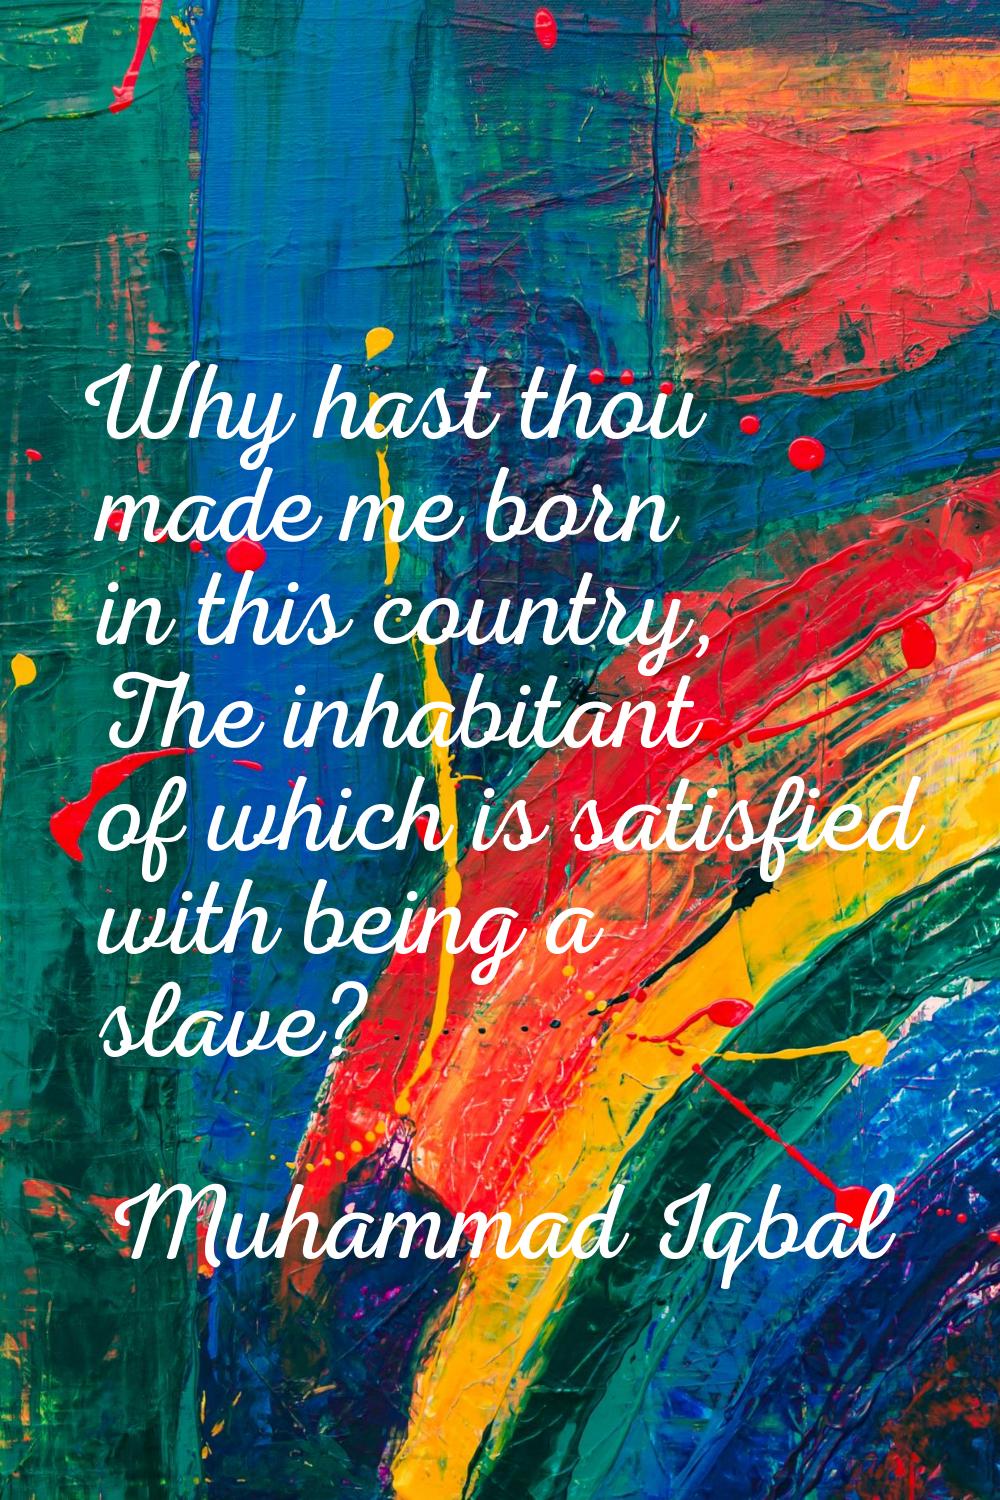 Why hast thou made me born in this country, The inhabitant of which is satisfied with being a slave